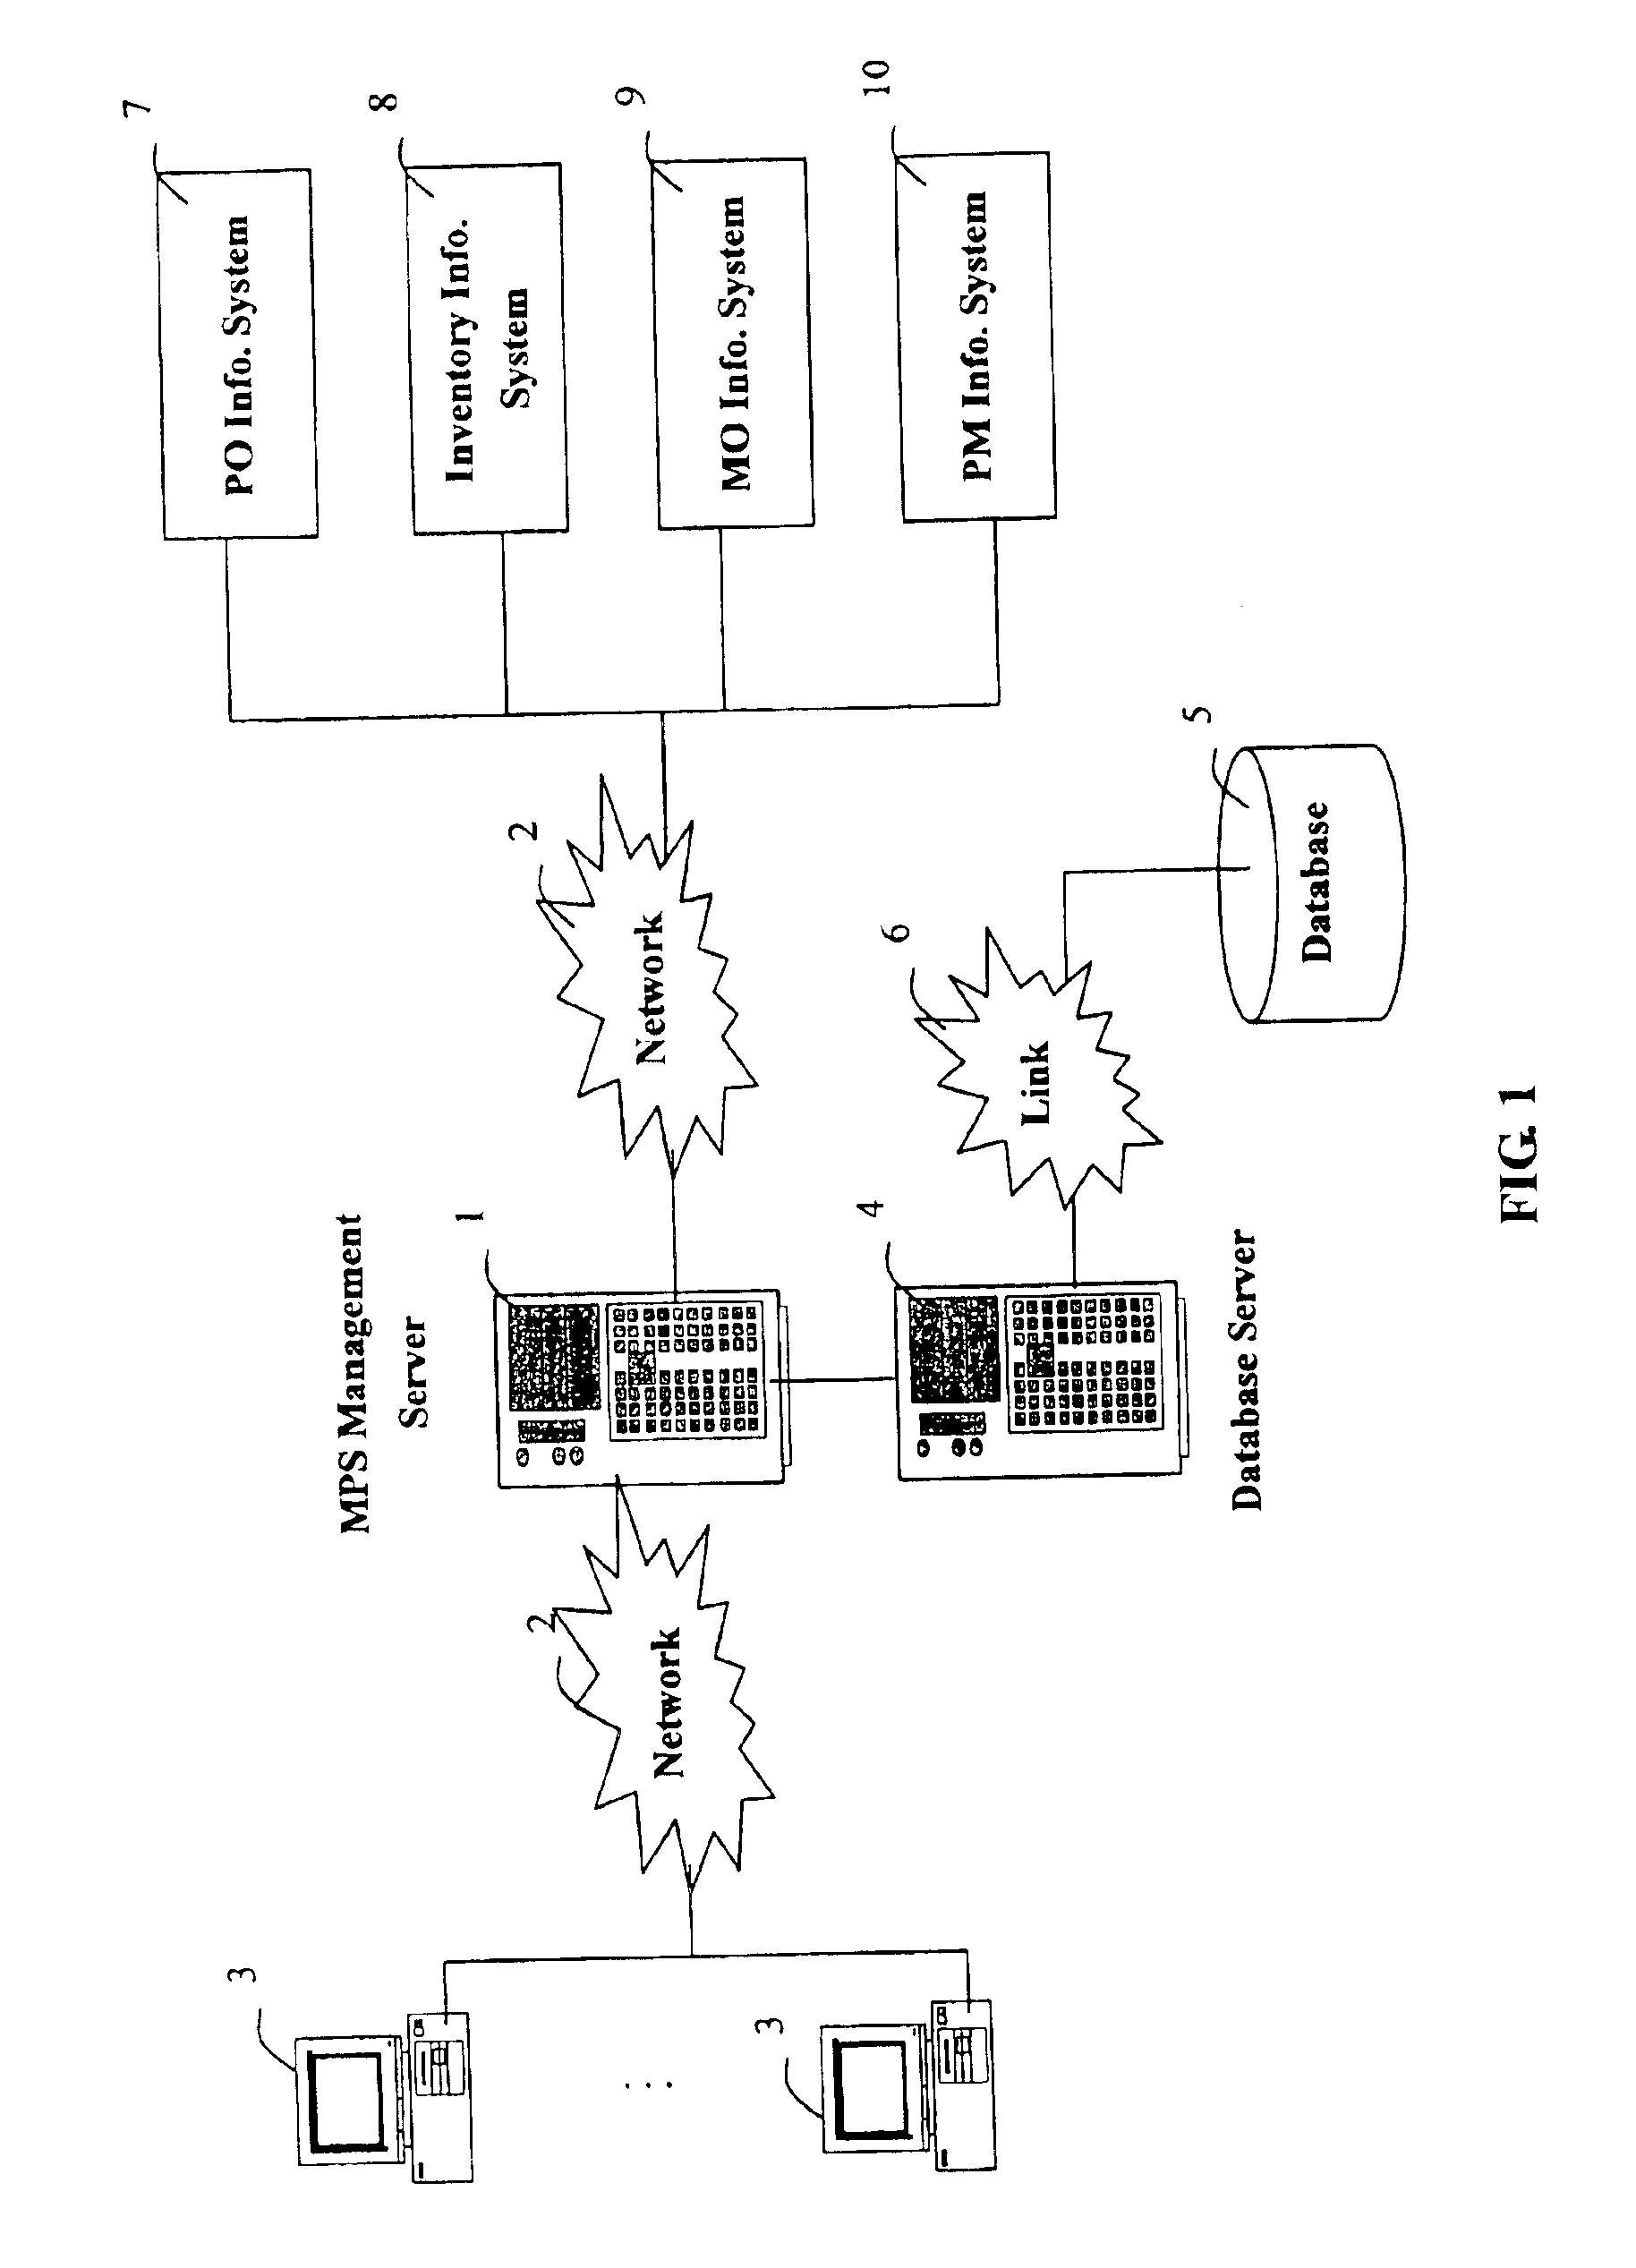 Master production scheduling management system and method